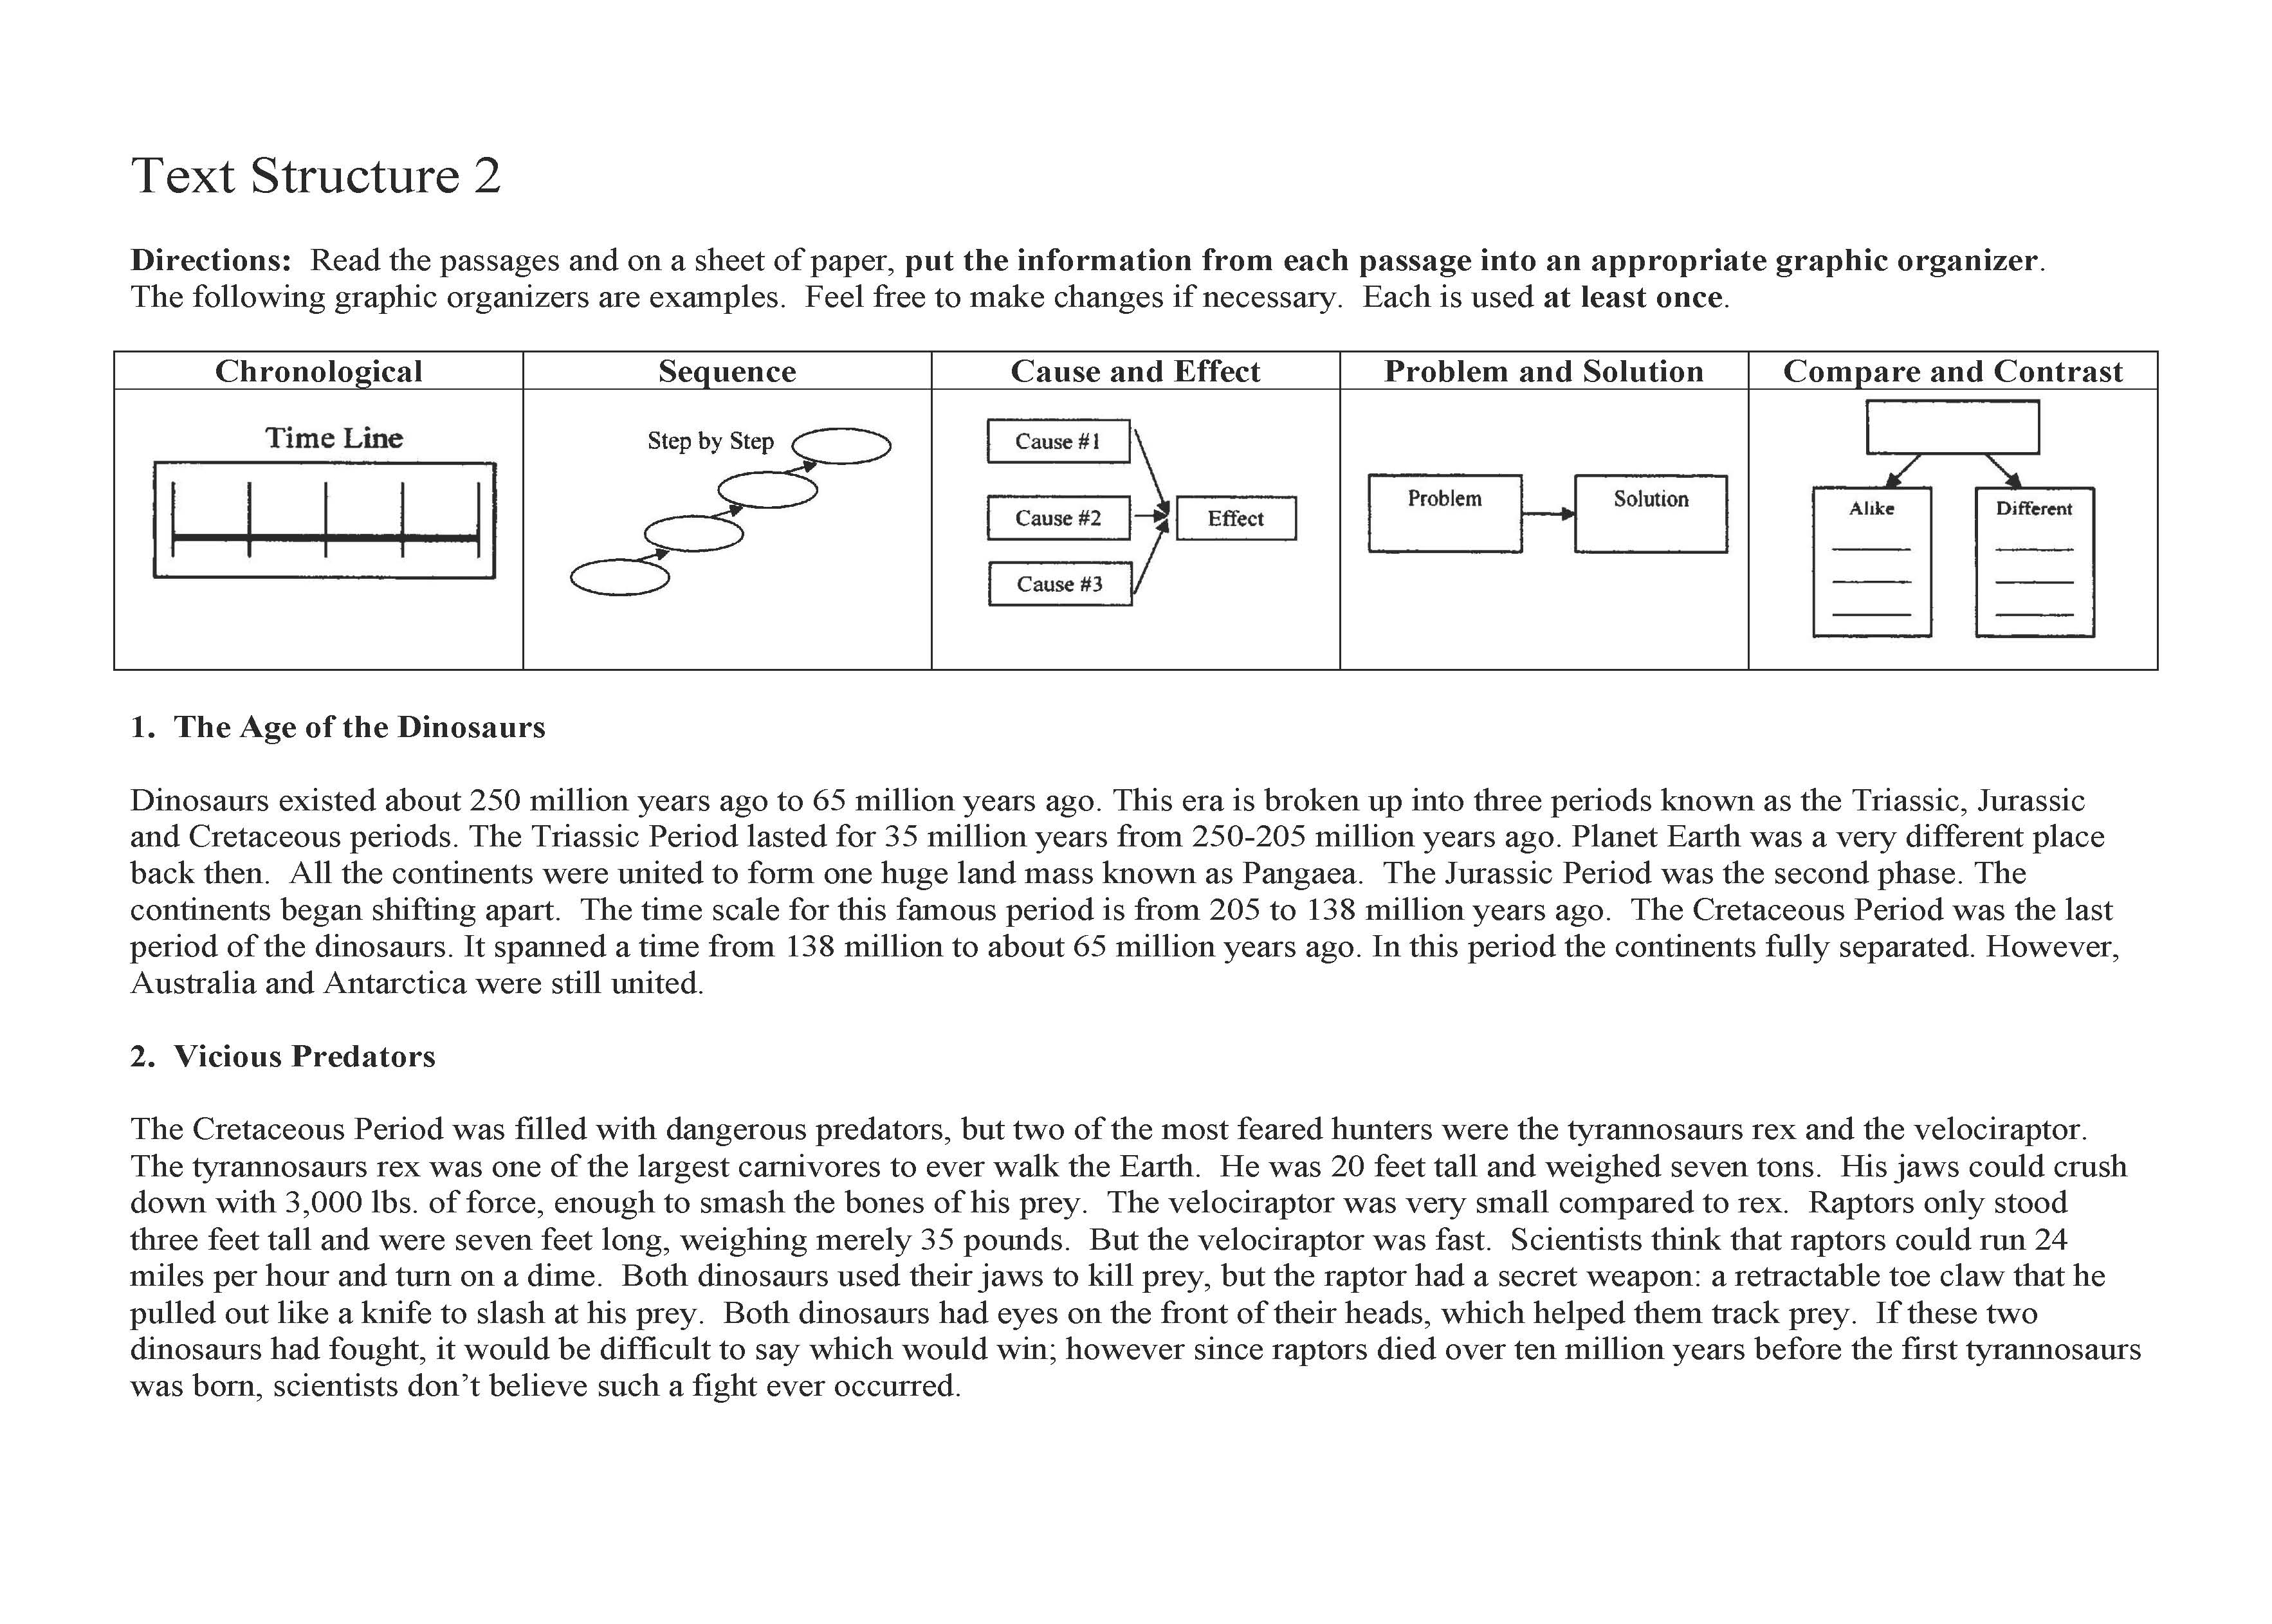 This is a preview image of Text Structure Worksheet 2. Click on it to enlarge it or view the source file.